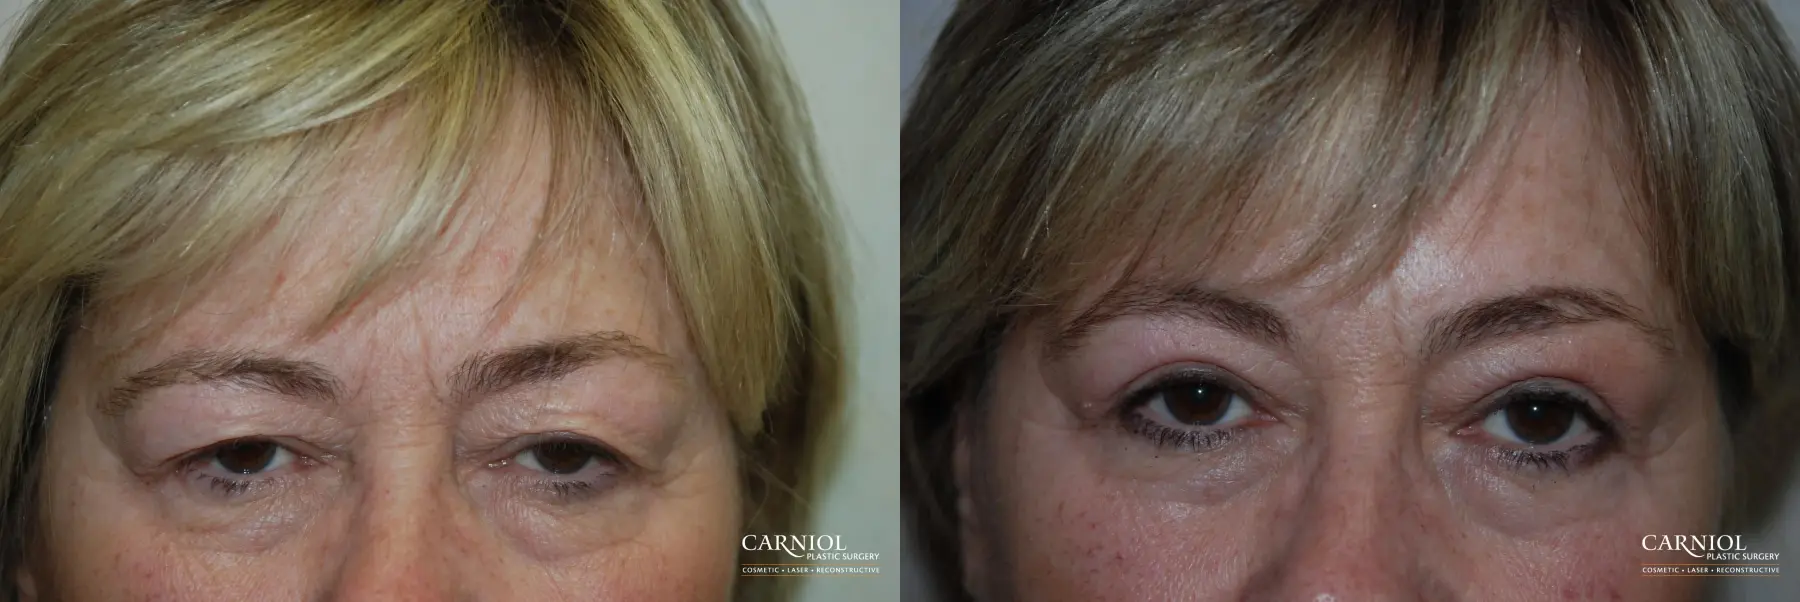 Upper Blepharoplasty Before - Before and After 1